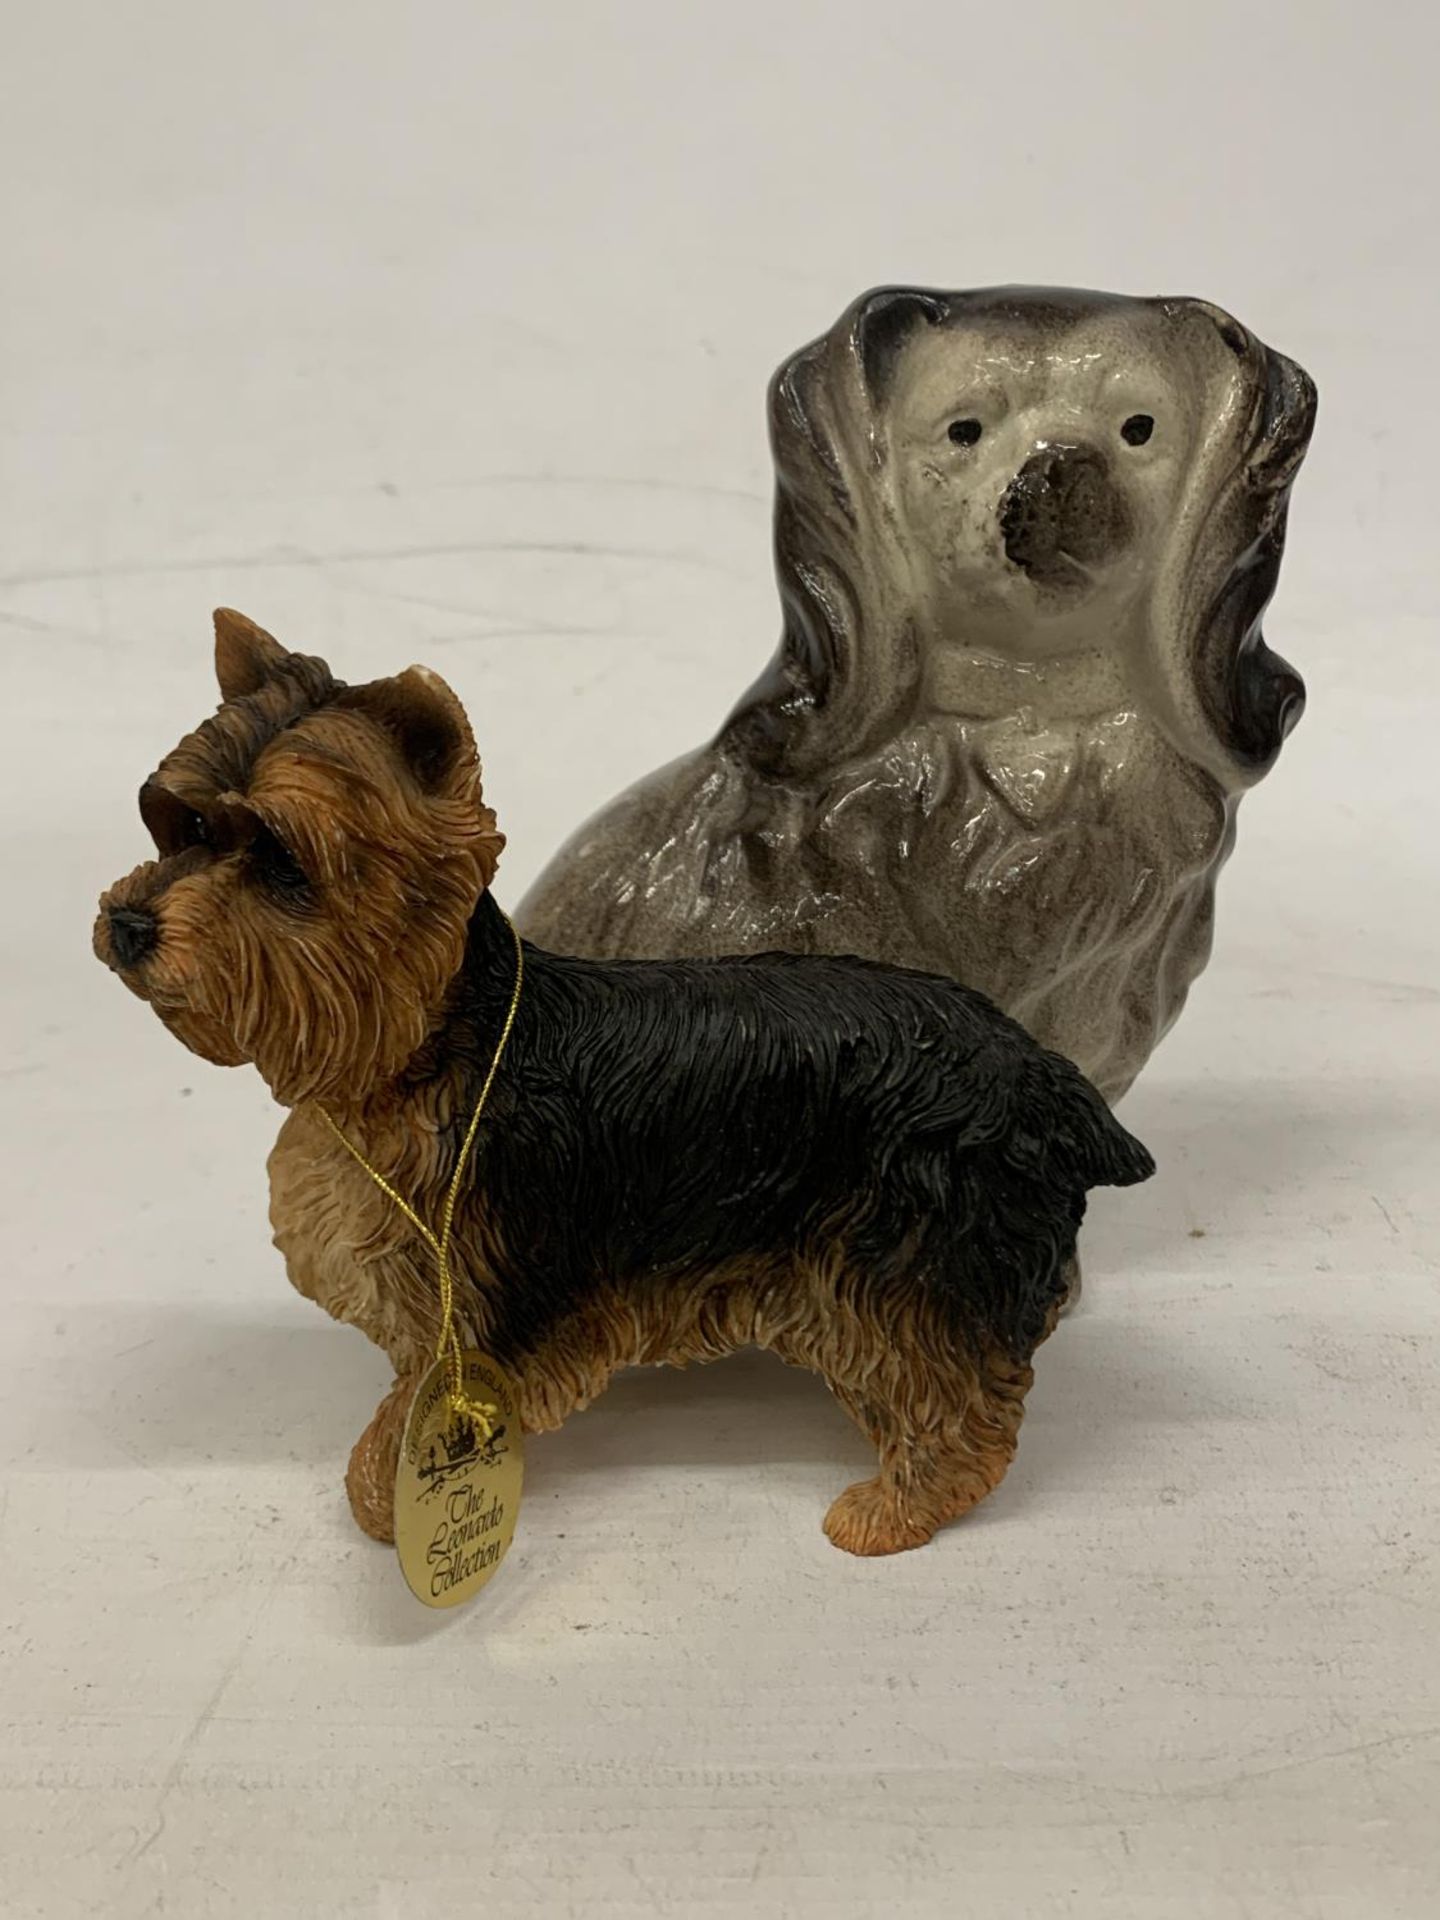 A FIGURE OF A MANTLE BLACK SPANIEL DOG AND A FURTHER LEONARD COLLECTION FIGURE OF A YORKSHIRE